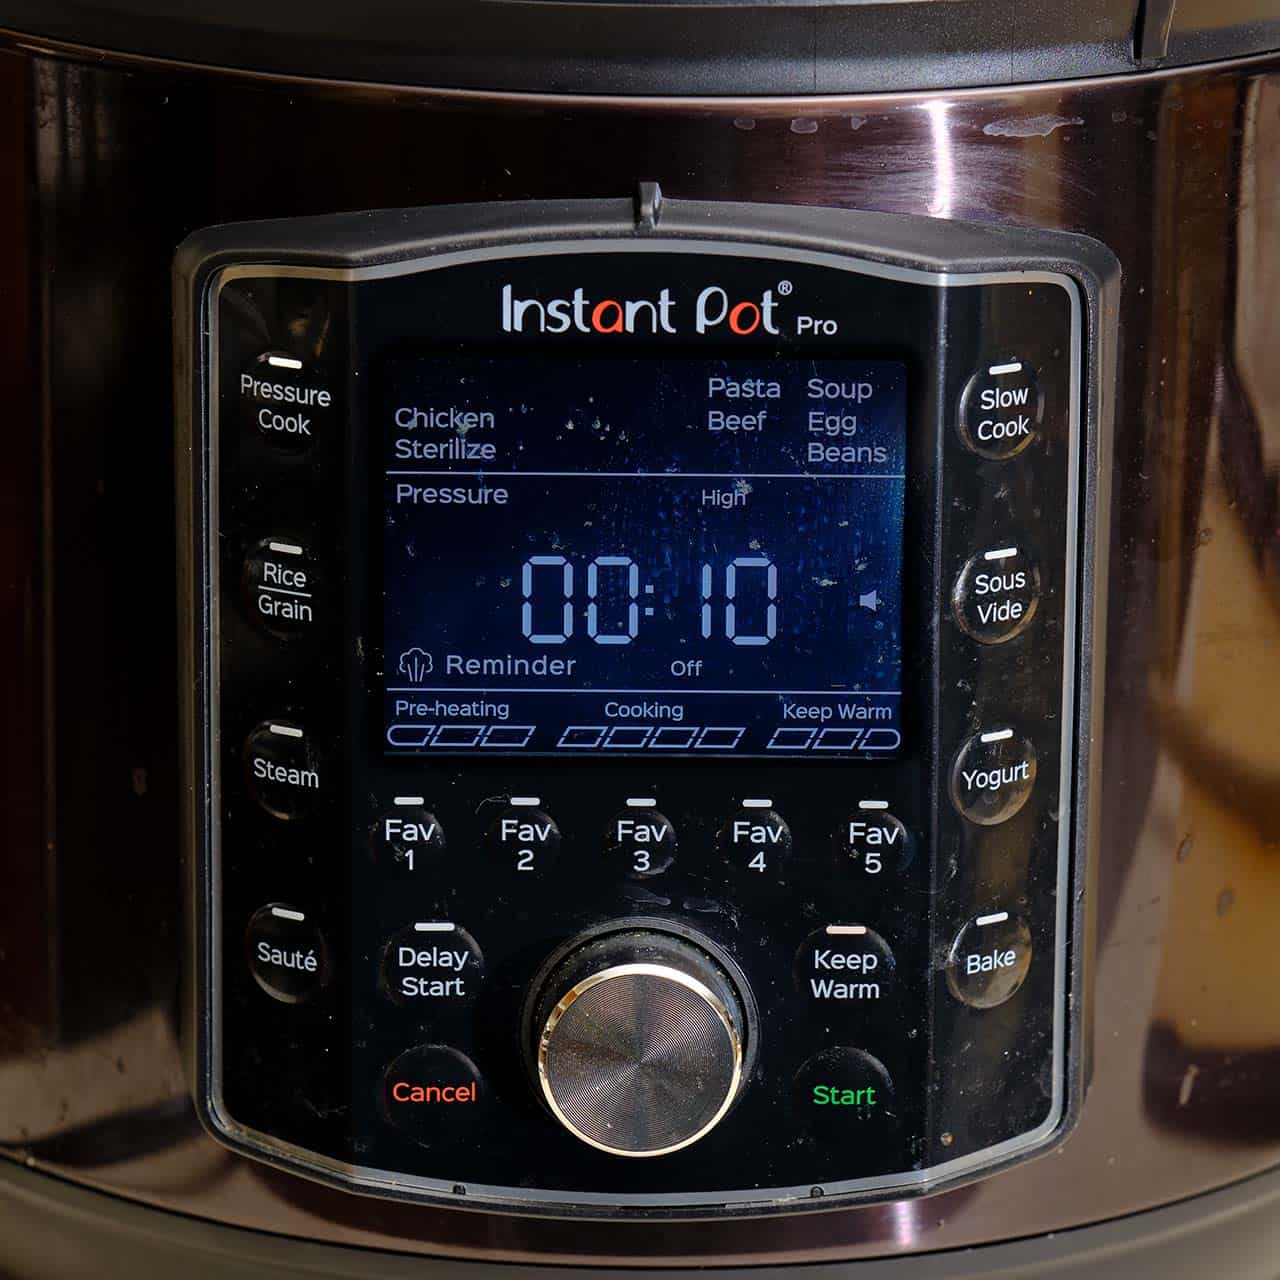 Instant Pot set to High Pressure for 10 minutes